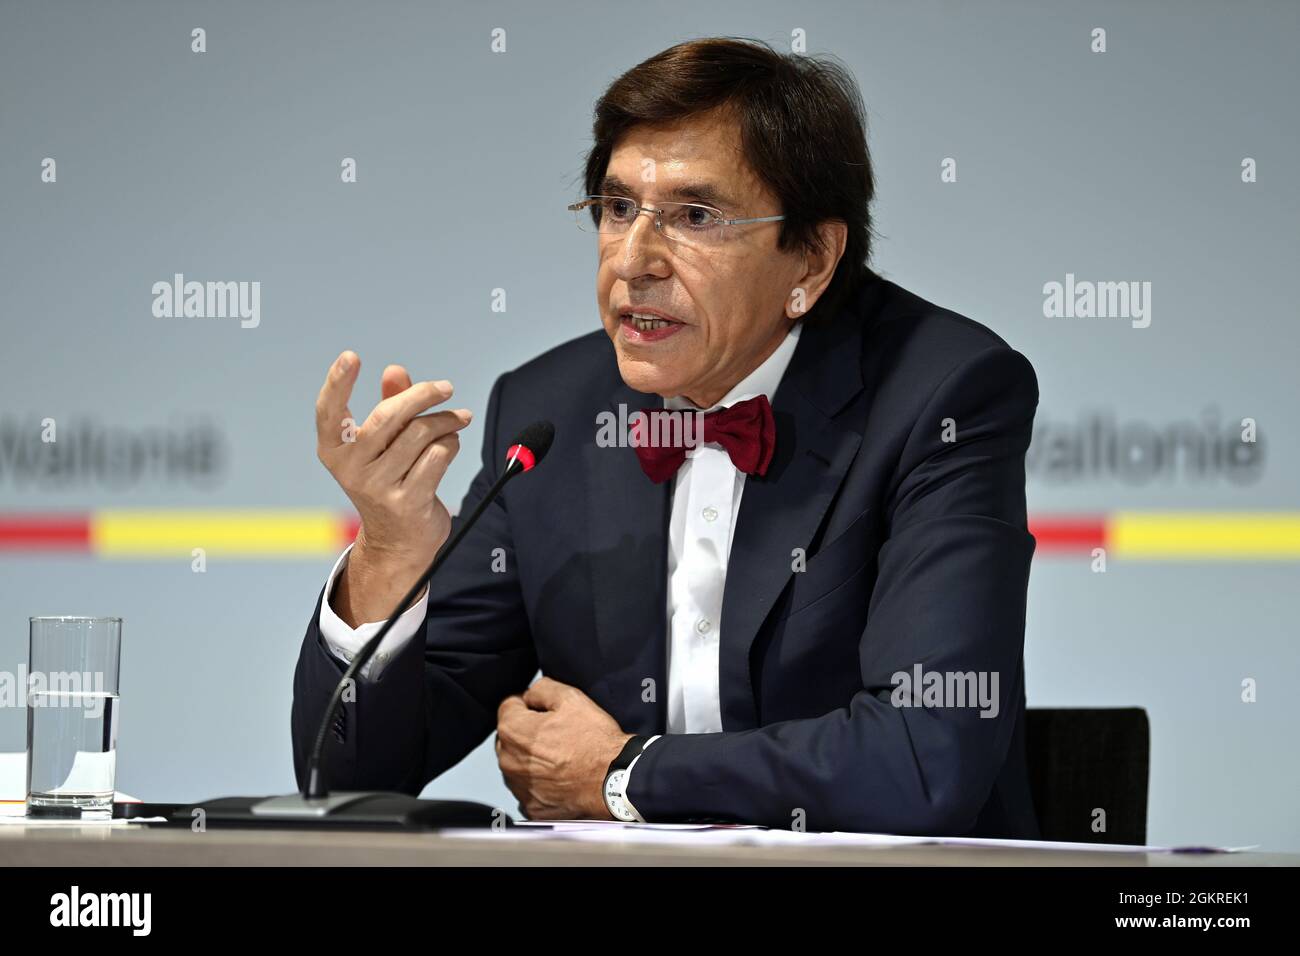 Walloon Minister President Elio Di Rupo pictured during a press conference of Walloon government to present aditional measures to help victims of this Stock Photo